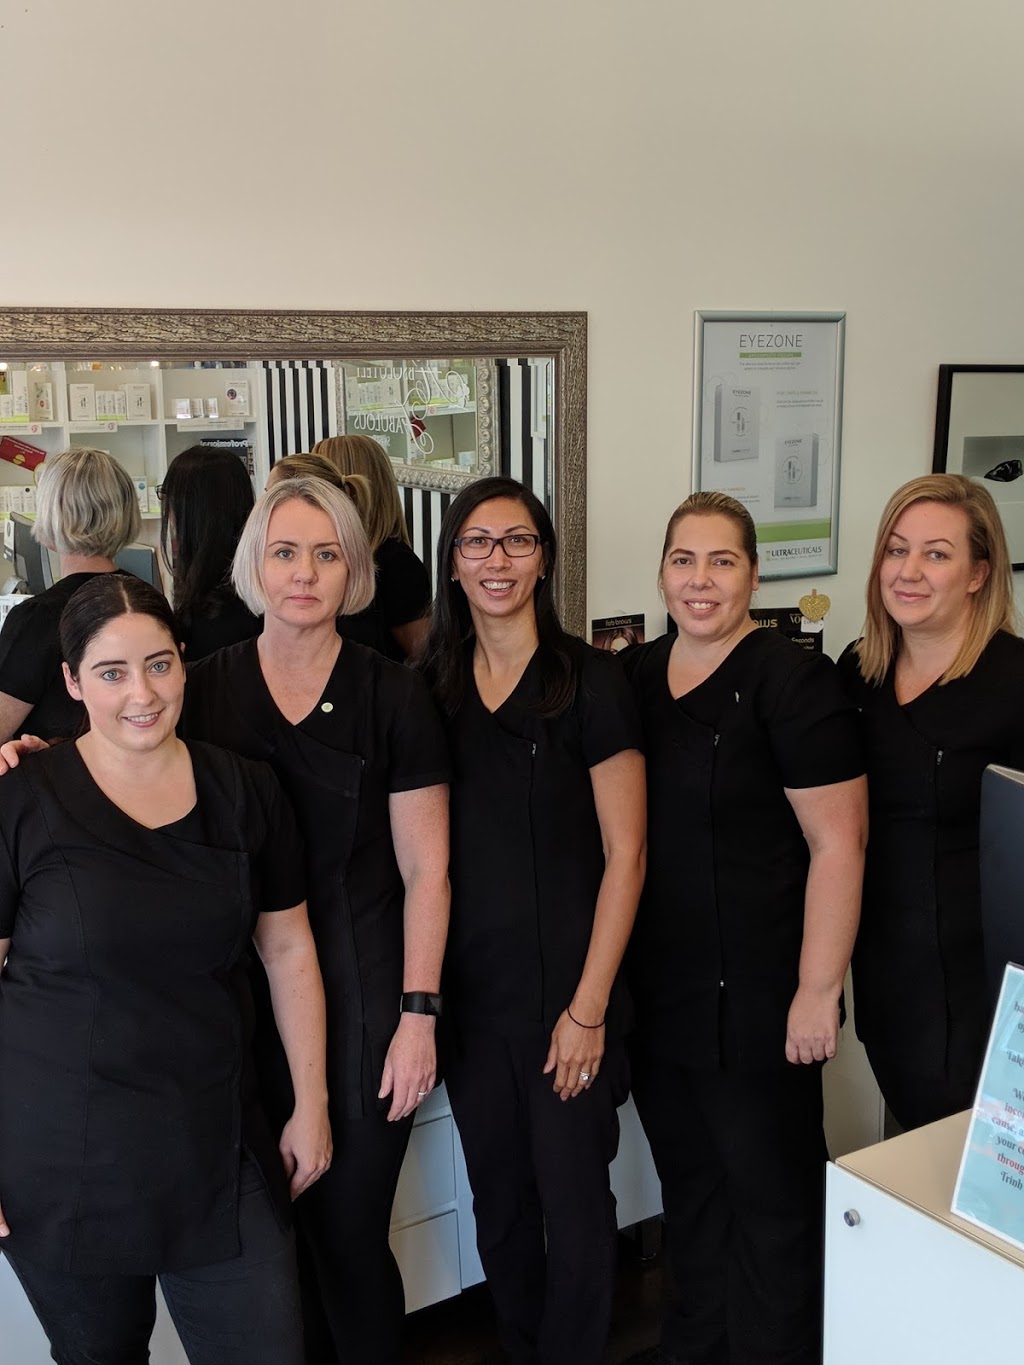 Absolutely Fabulous Skin Therapy | 10 Lackey St, Summer Hill NSW 2130, Australia | Phone: (02) 9798 2277